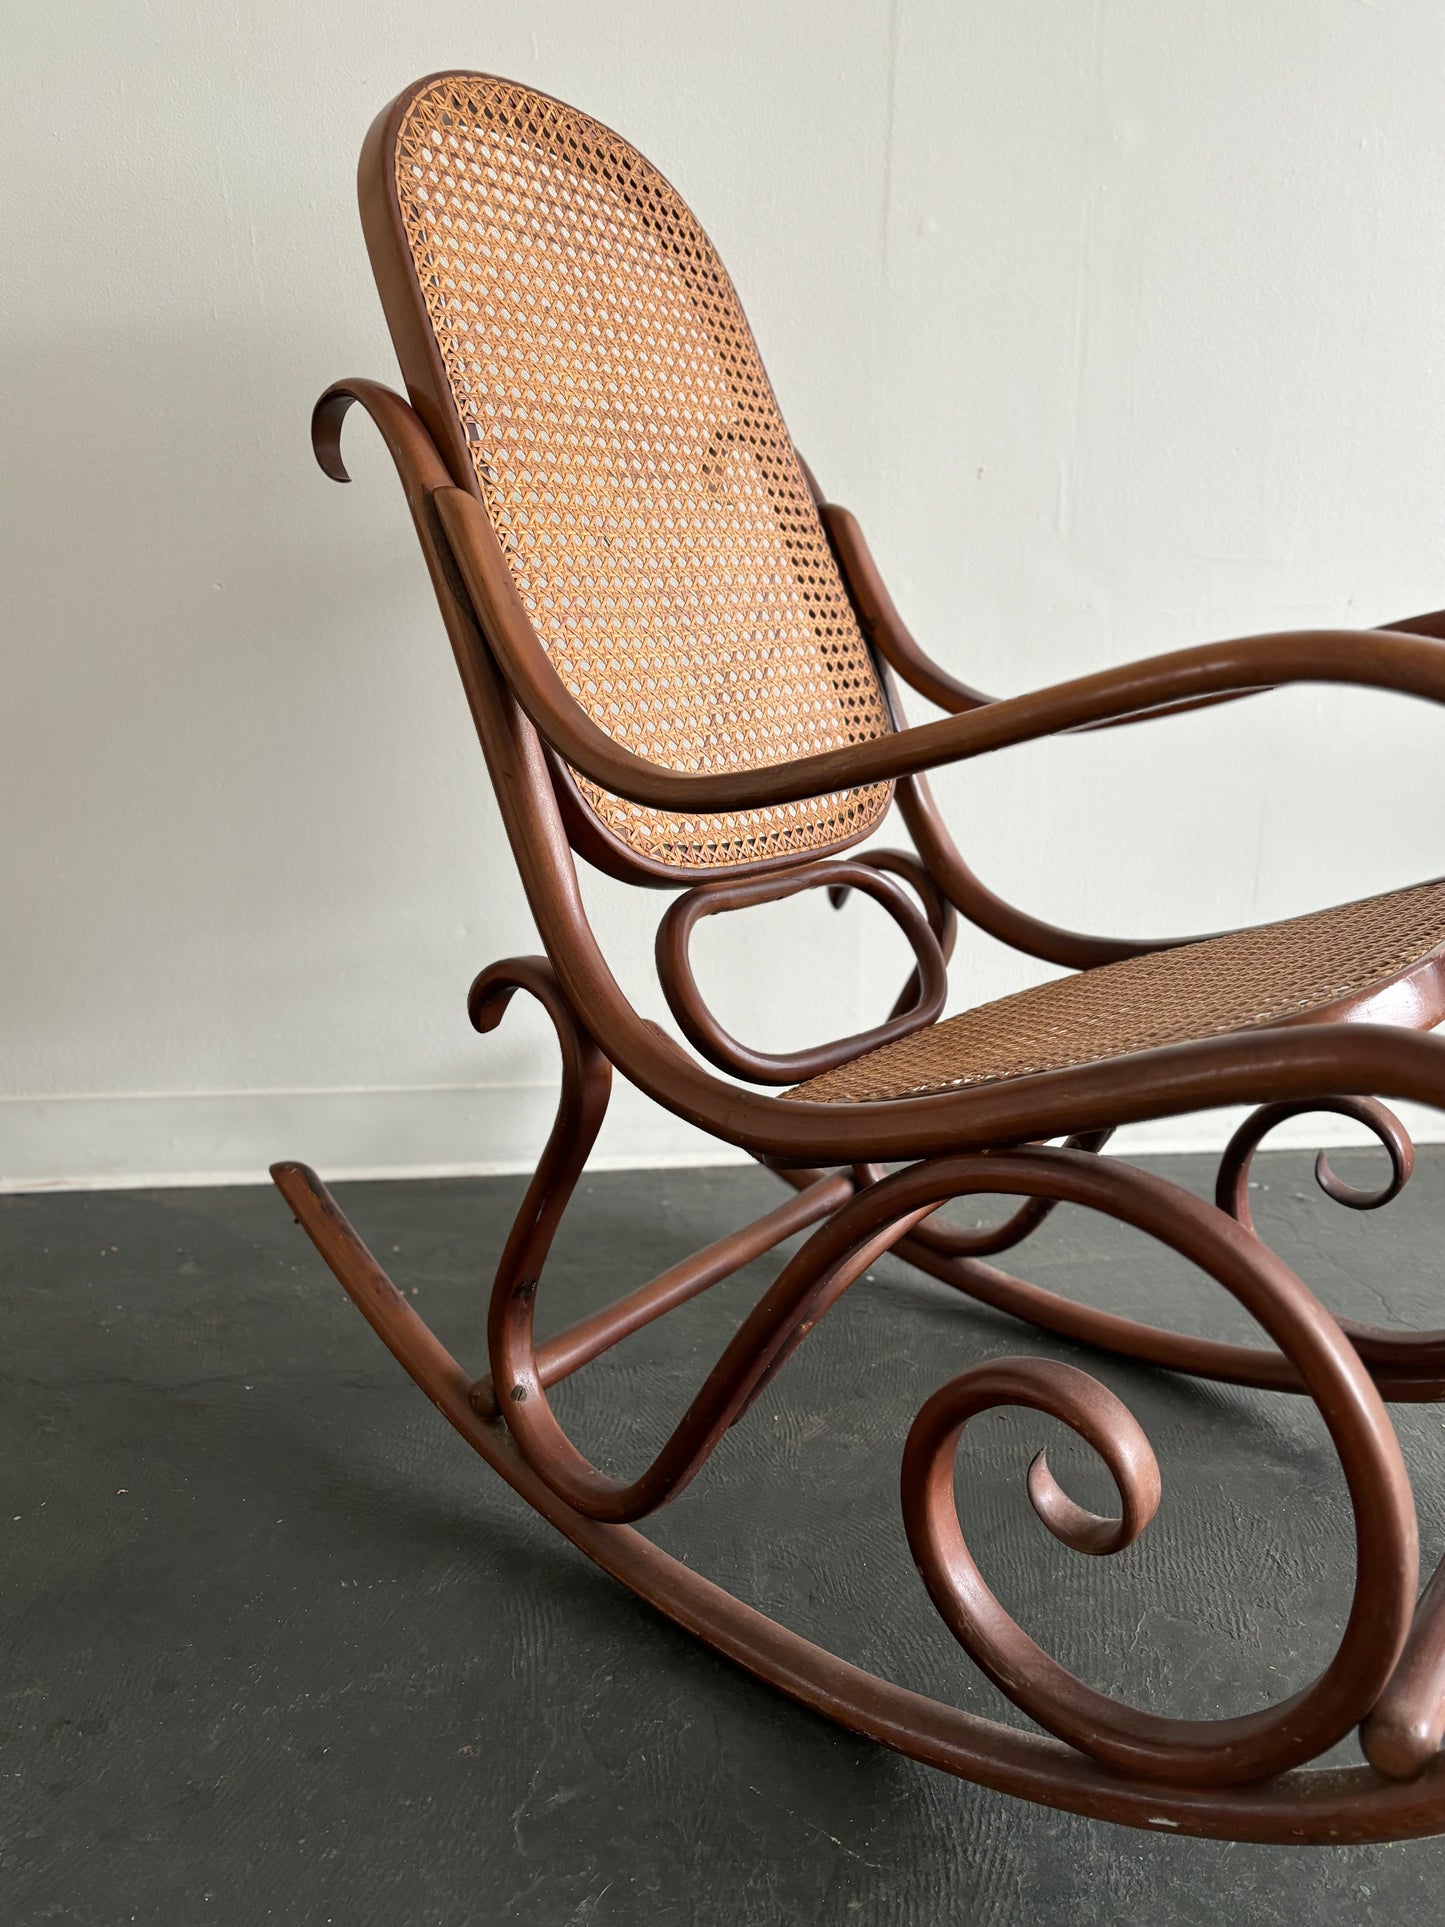 Thonet-Style Bentwood Rocking Chair